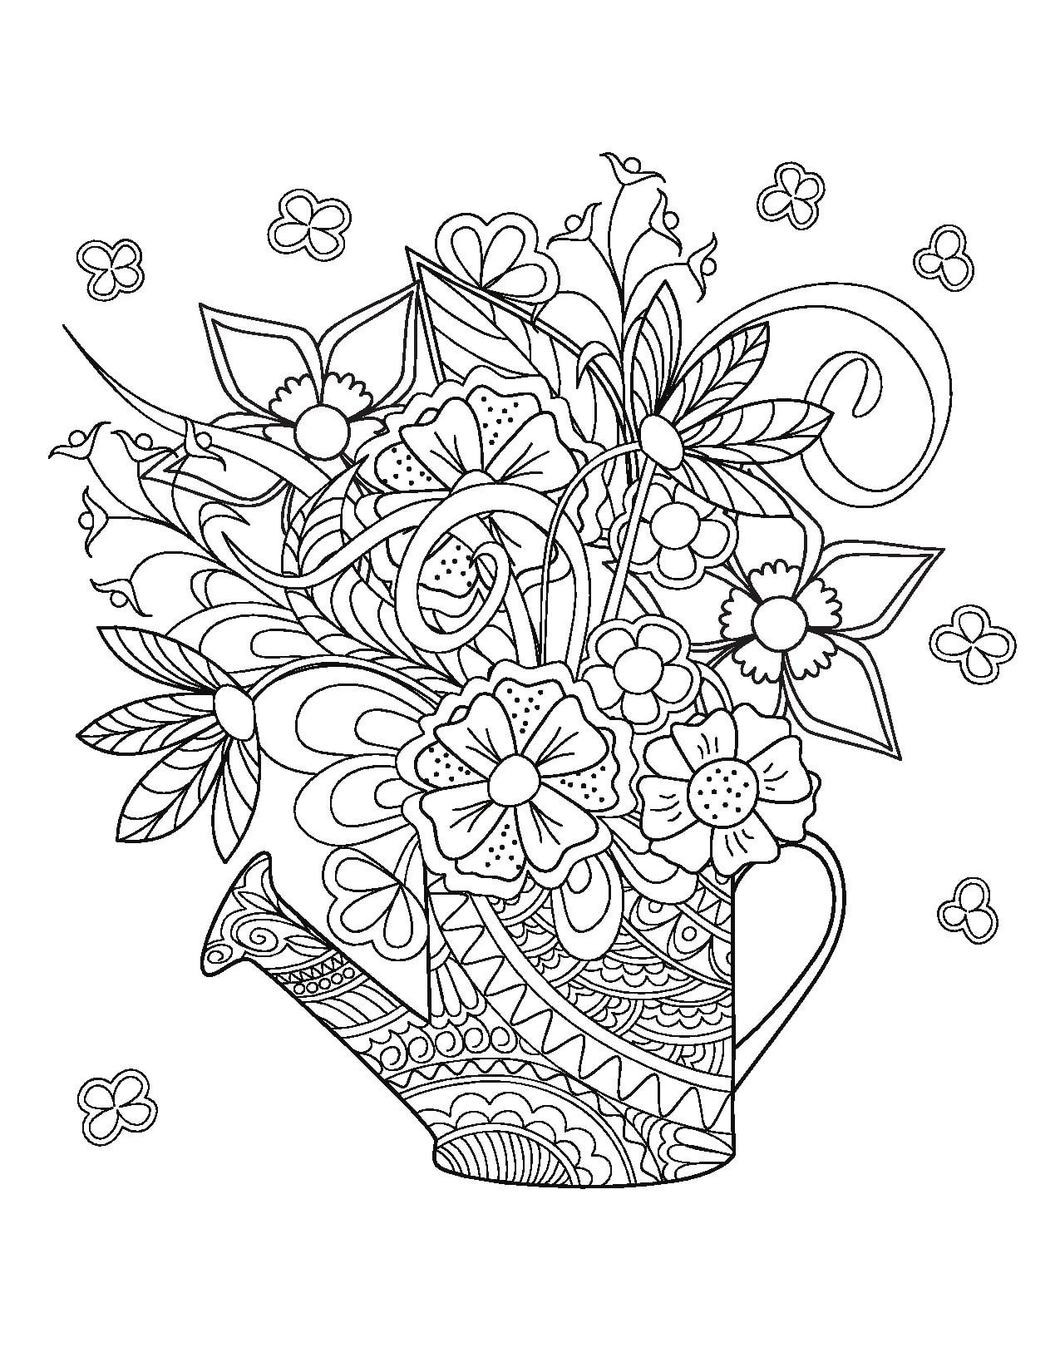 Adult Coloring Book Images
 Adult Coloring for the Bride to Be Live Your Life in